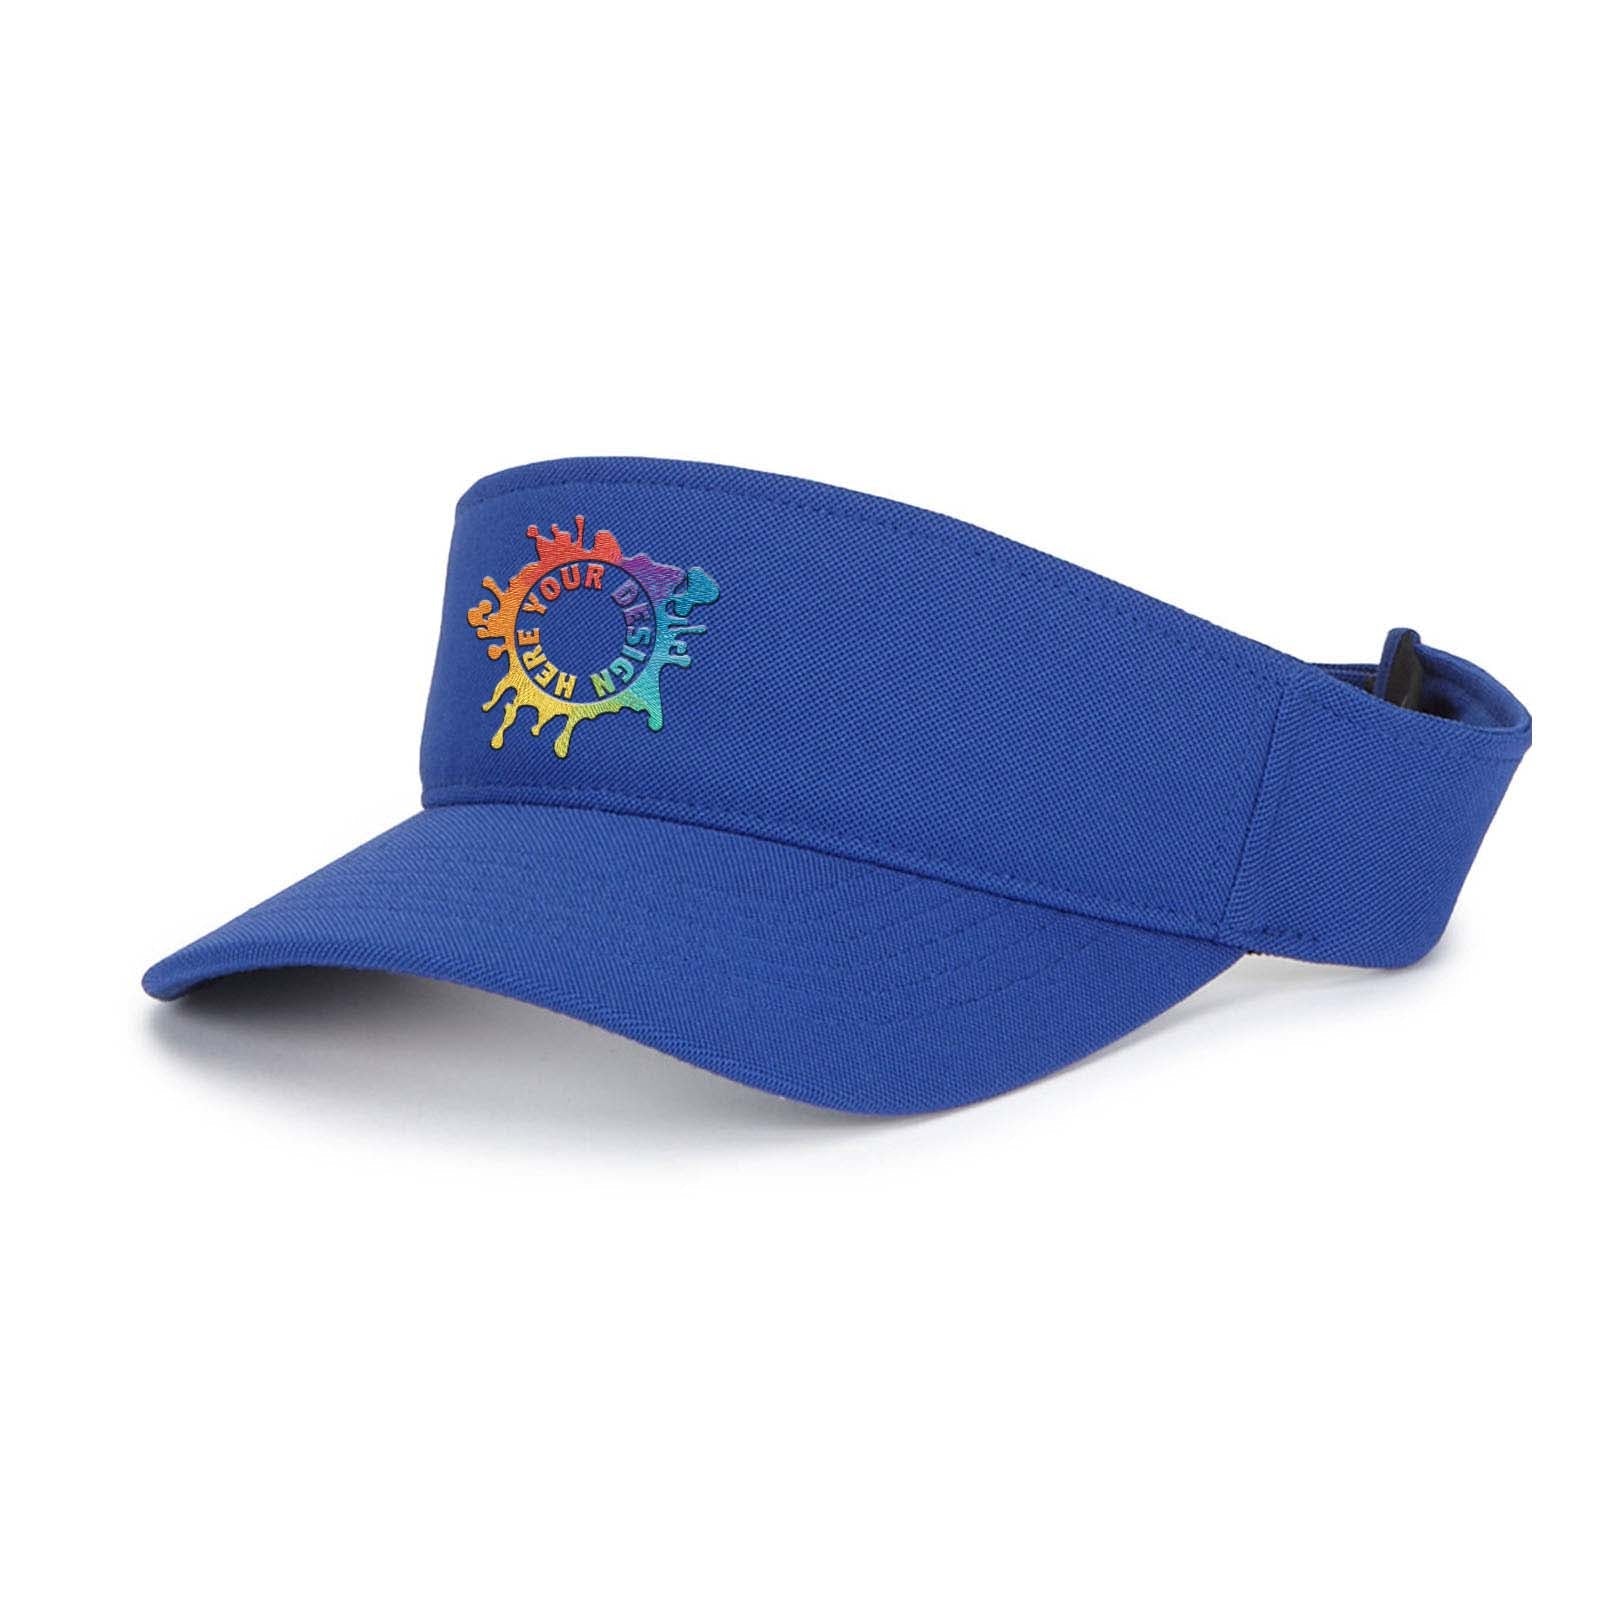 Embroidered Flexfit Adult Cool & Dry Visor - Mato & Hash